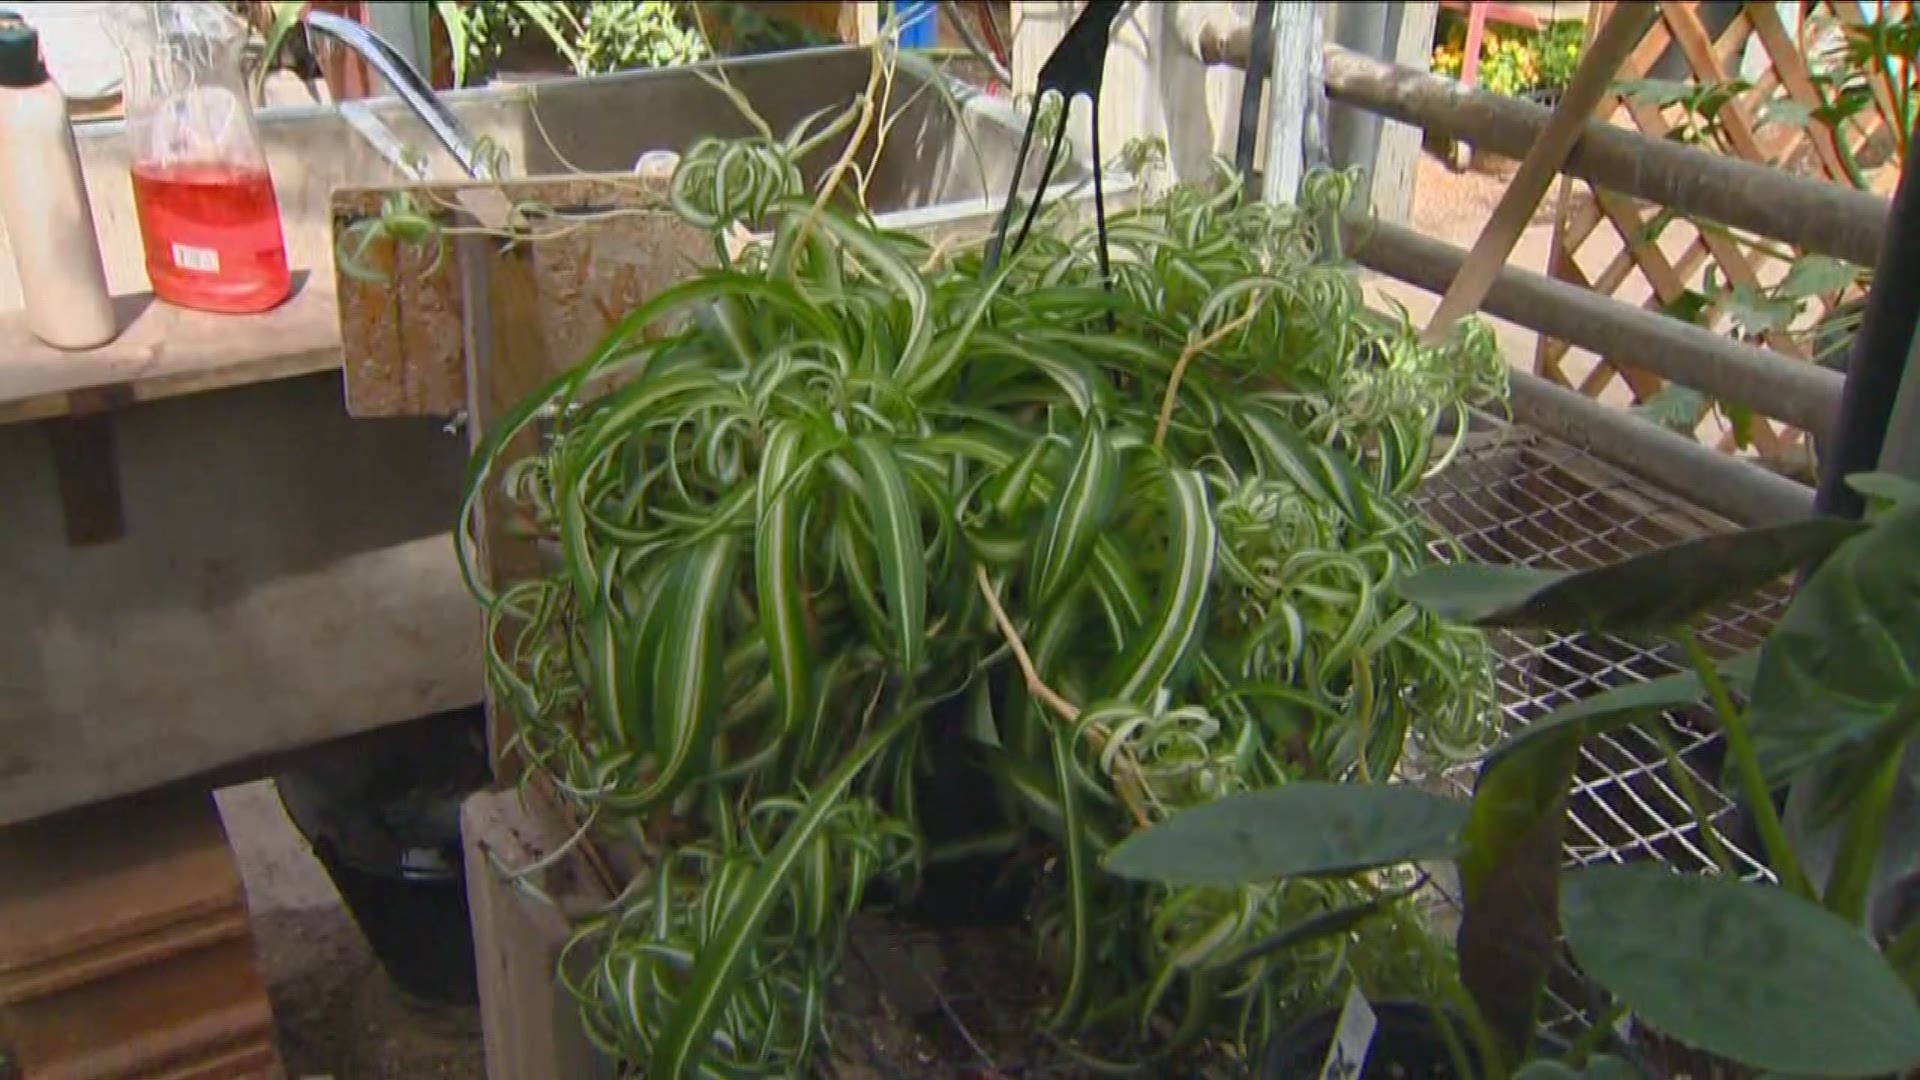 Jim Duthie shows us some houseplants that will help clean the air you breathe.